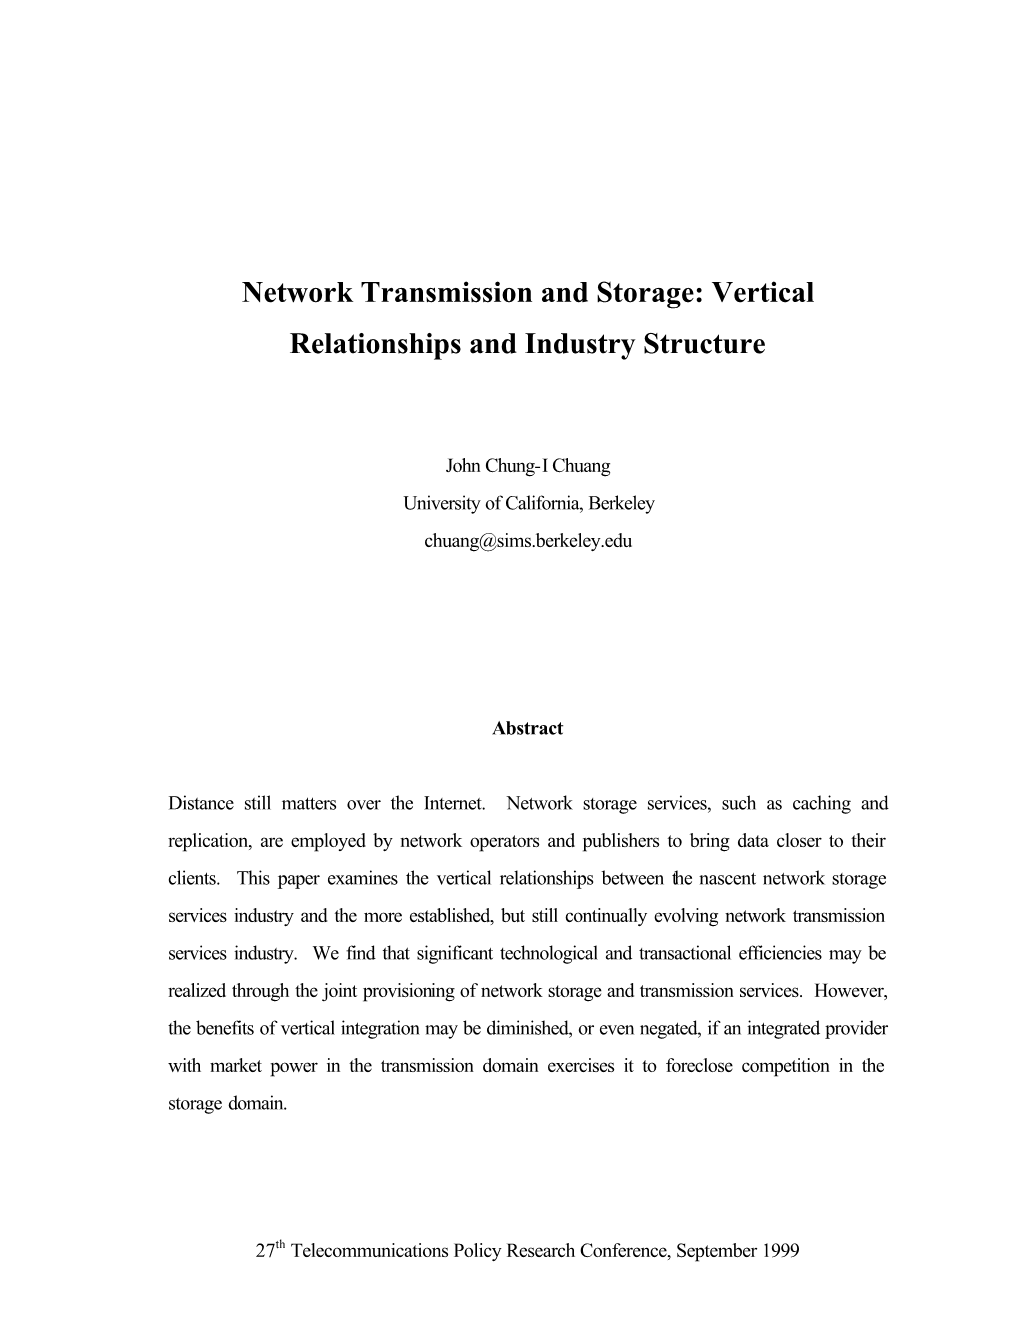 Network Transmission and Storage: Vertical Relationships and Industry Structure